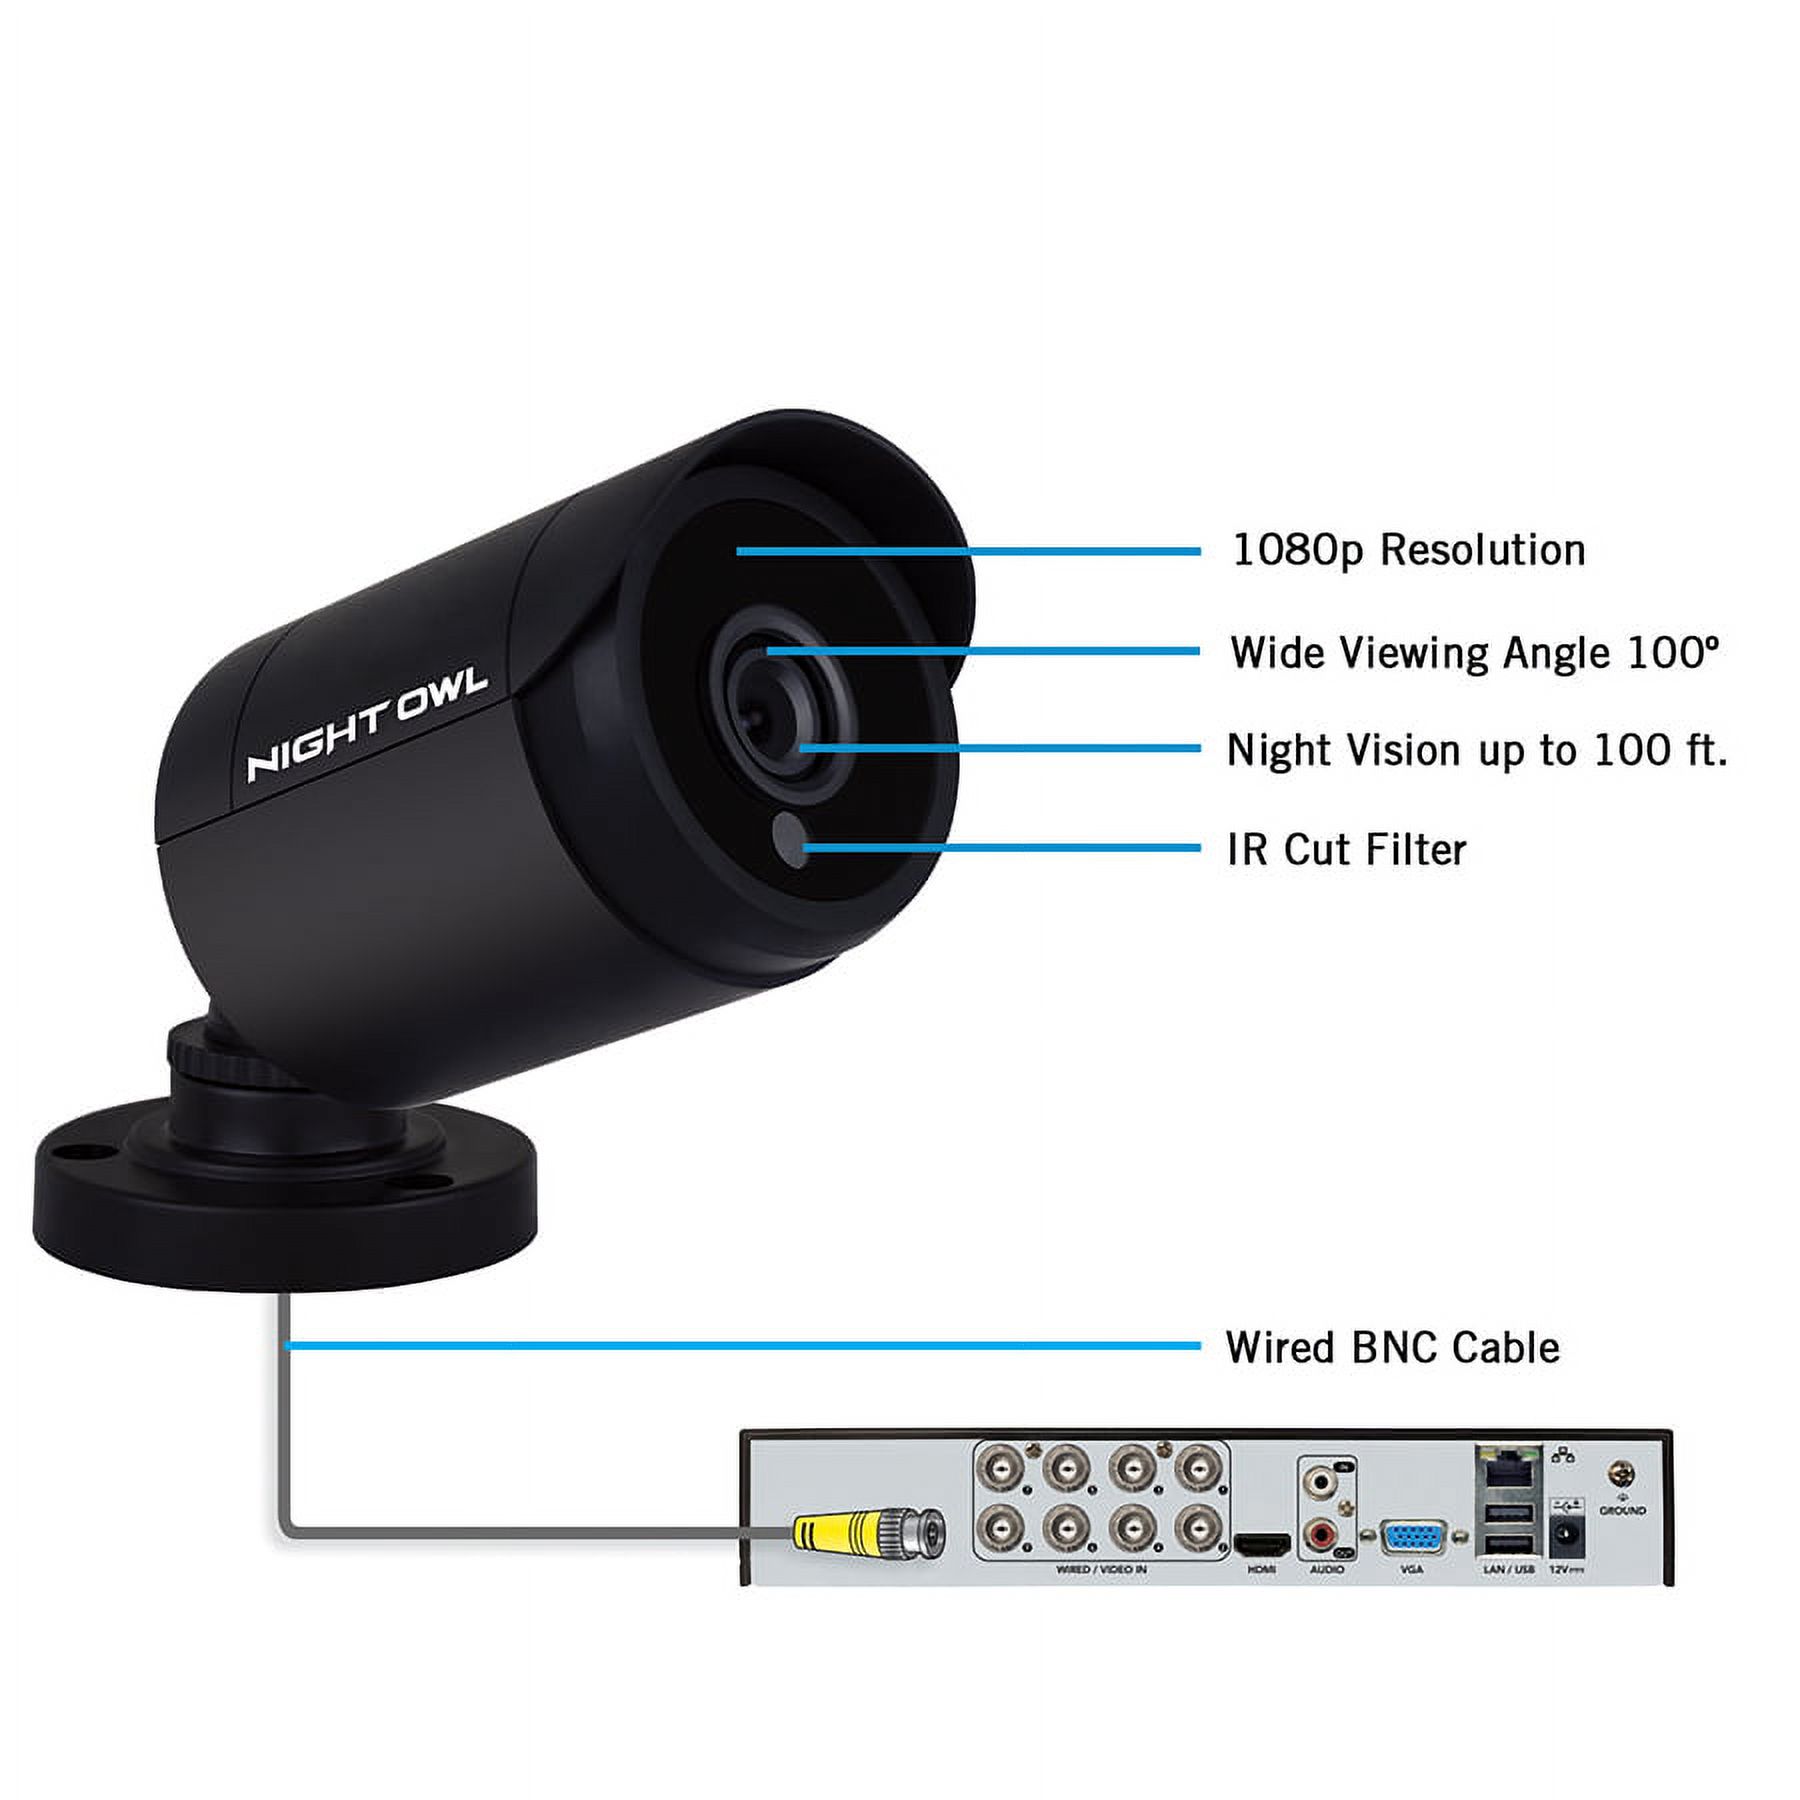 Night Owl's 8 CH 1080p HD Wired Video Security System with 6 Indoor/Outdoor Cameras, Human Detection Technology and a 1TB Pre-Installed Hard Drive - image 5 of 7